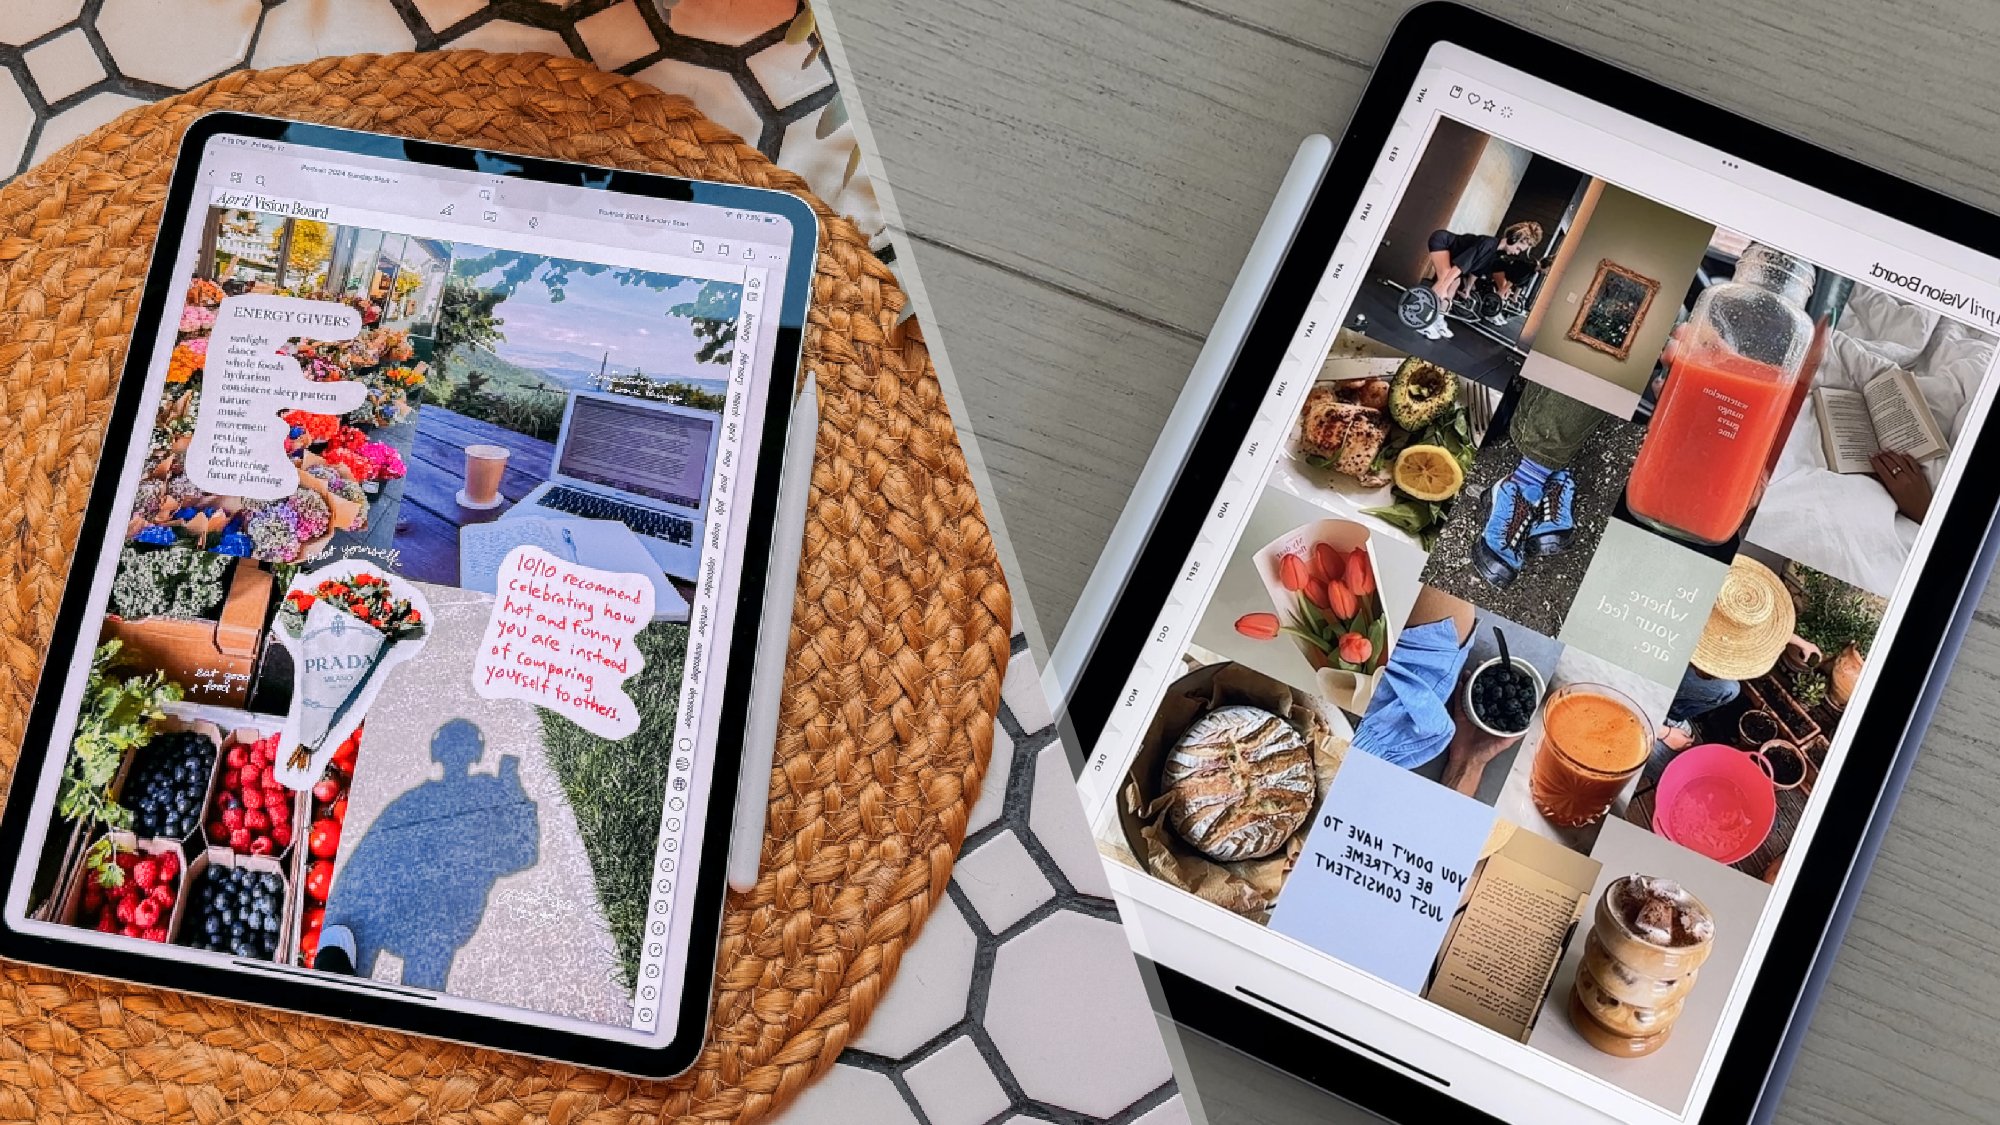 Digital planning and vision boarding on the iPad Air